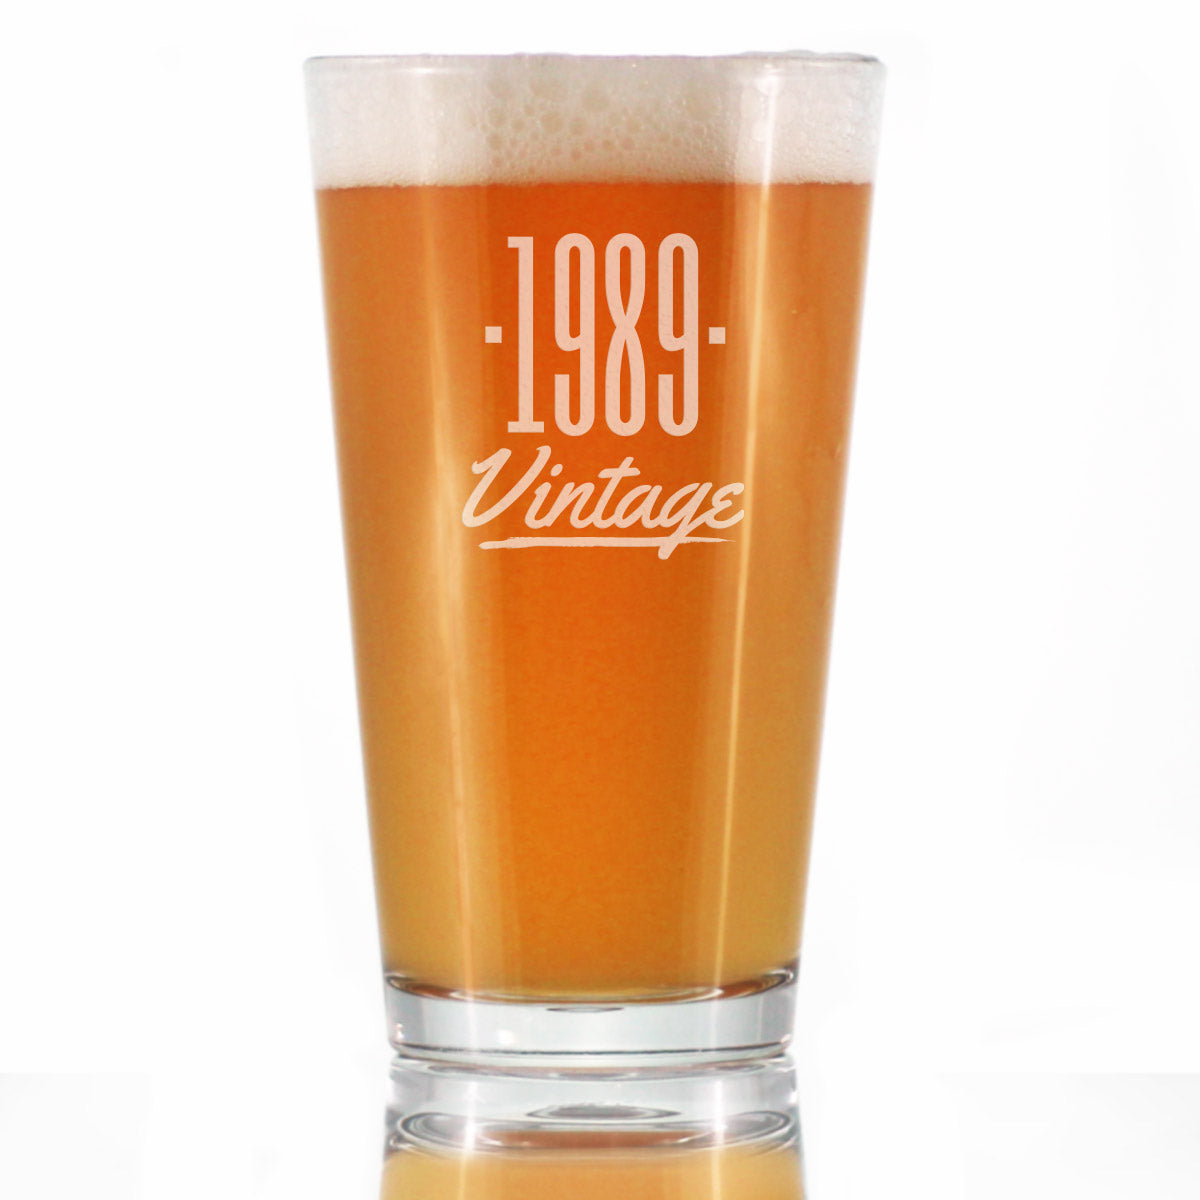 Vintage 1989 - Pint Glass for Beer - 35th Birthday Gifts for Men or Women Turning 35 - Fun Bday Party Decor - 16 oz